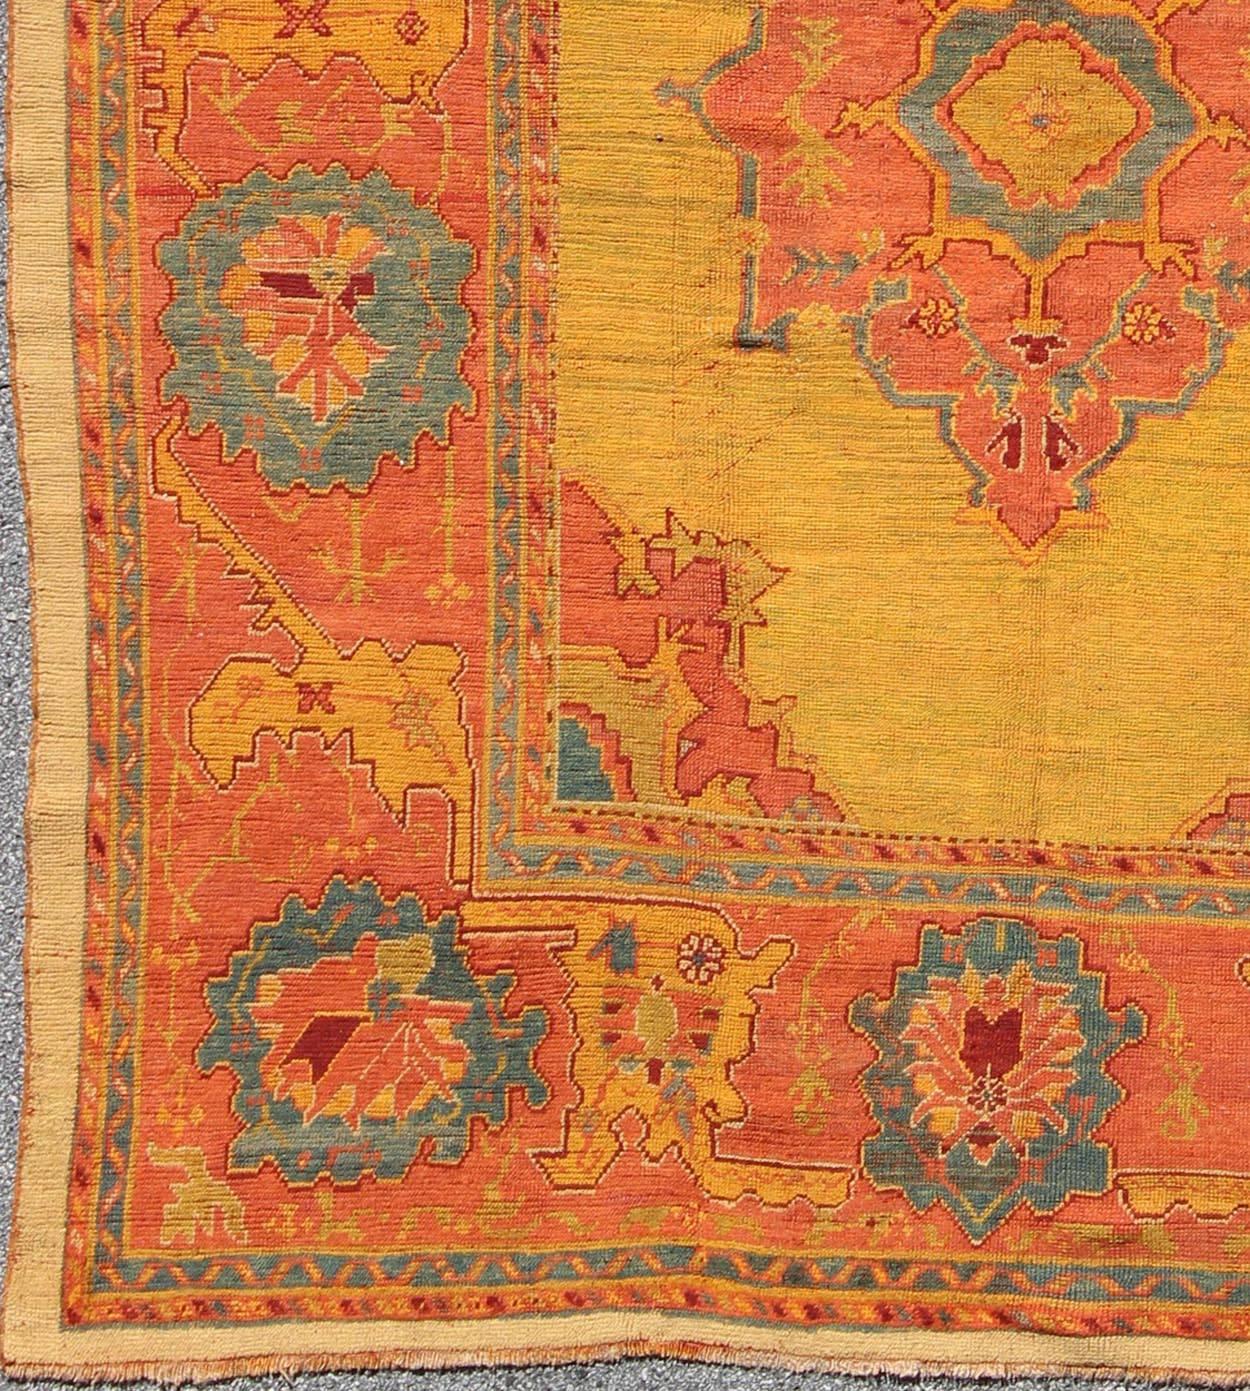 Antique Turkish Oushak Rug in  Saturated Gold, Orange Colors and Blue Accent.
Fashioned during the turn of the 20th Century, this unusual antique Oushak bears a remarkable geometric design paired with a delicately understated palette. An saffron